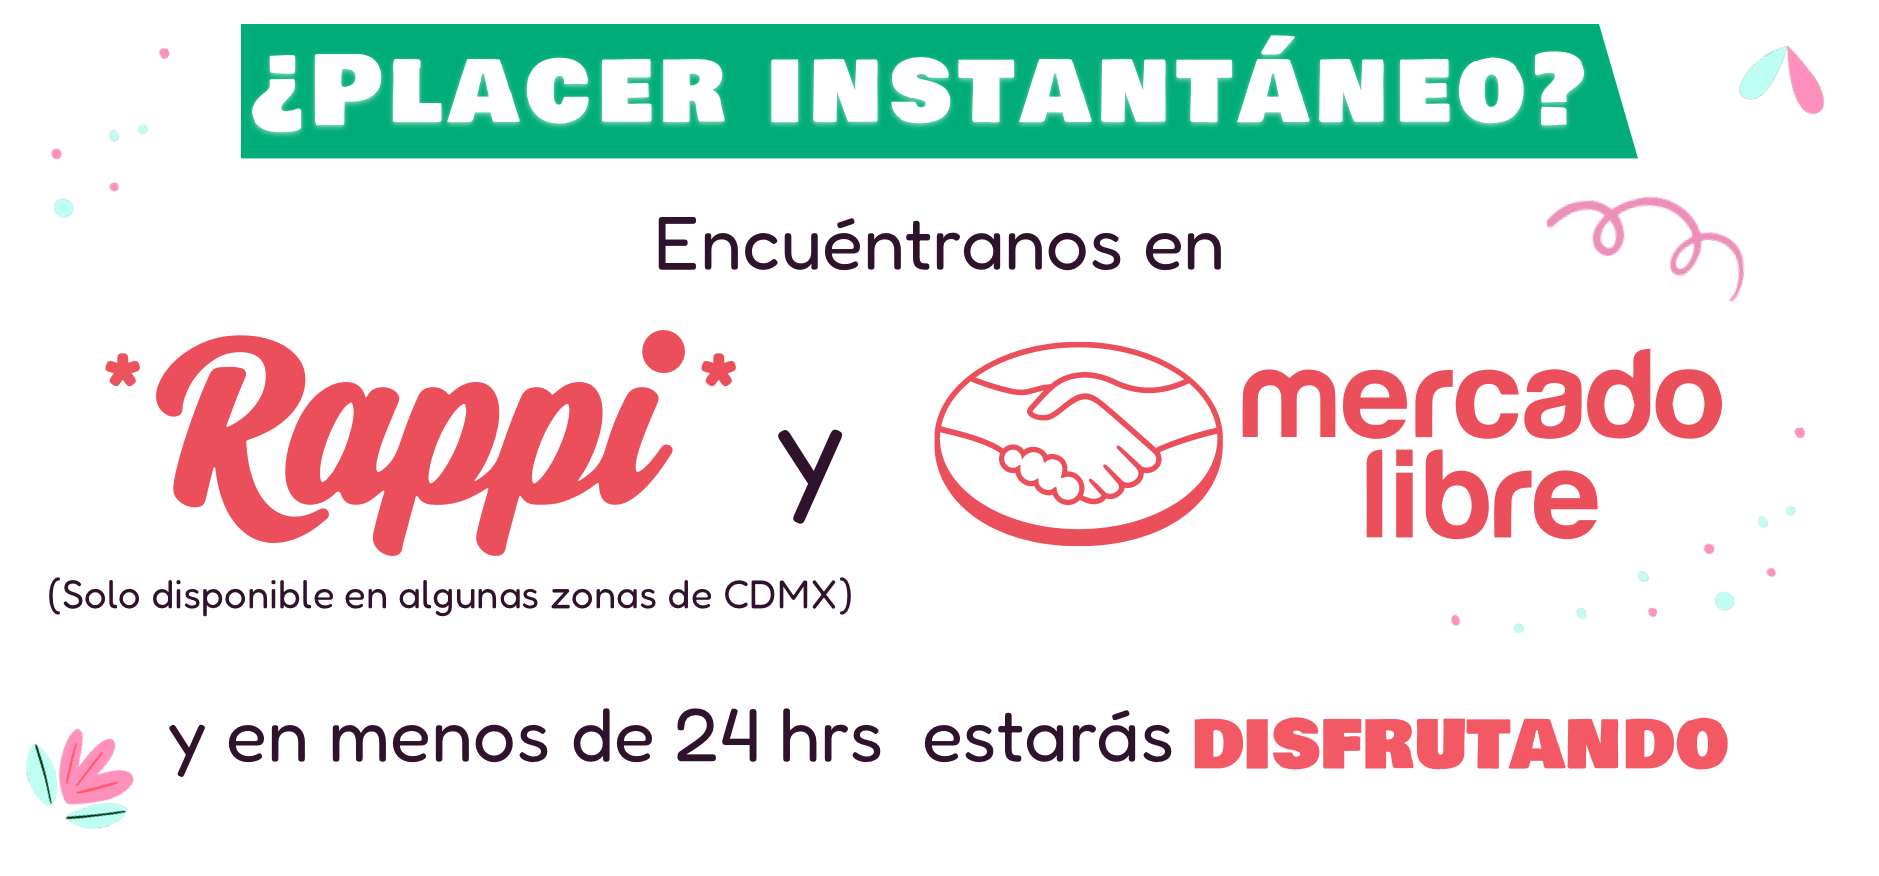 ¡Placer instantáneo!